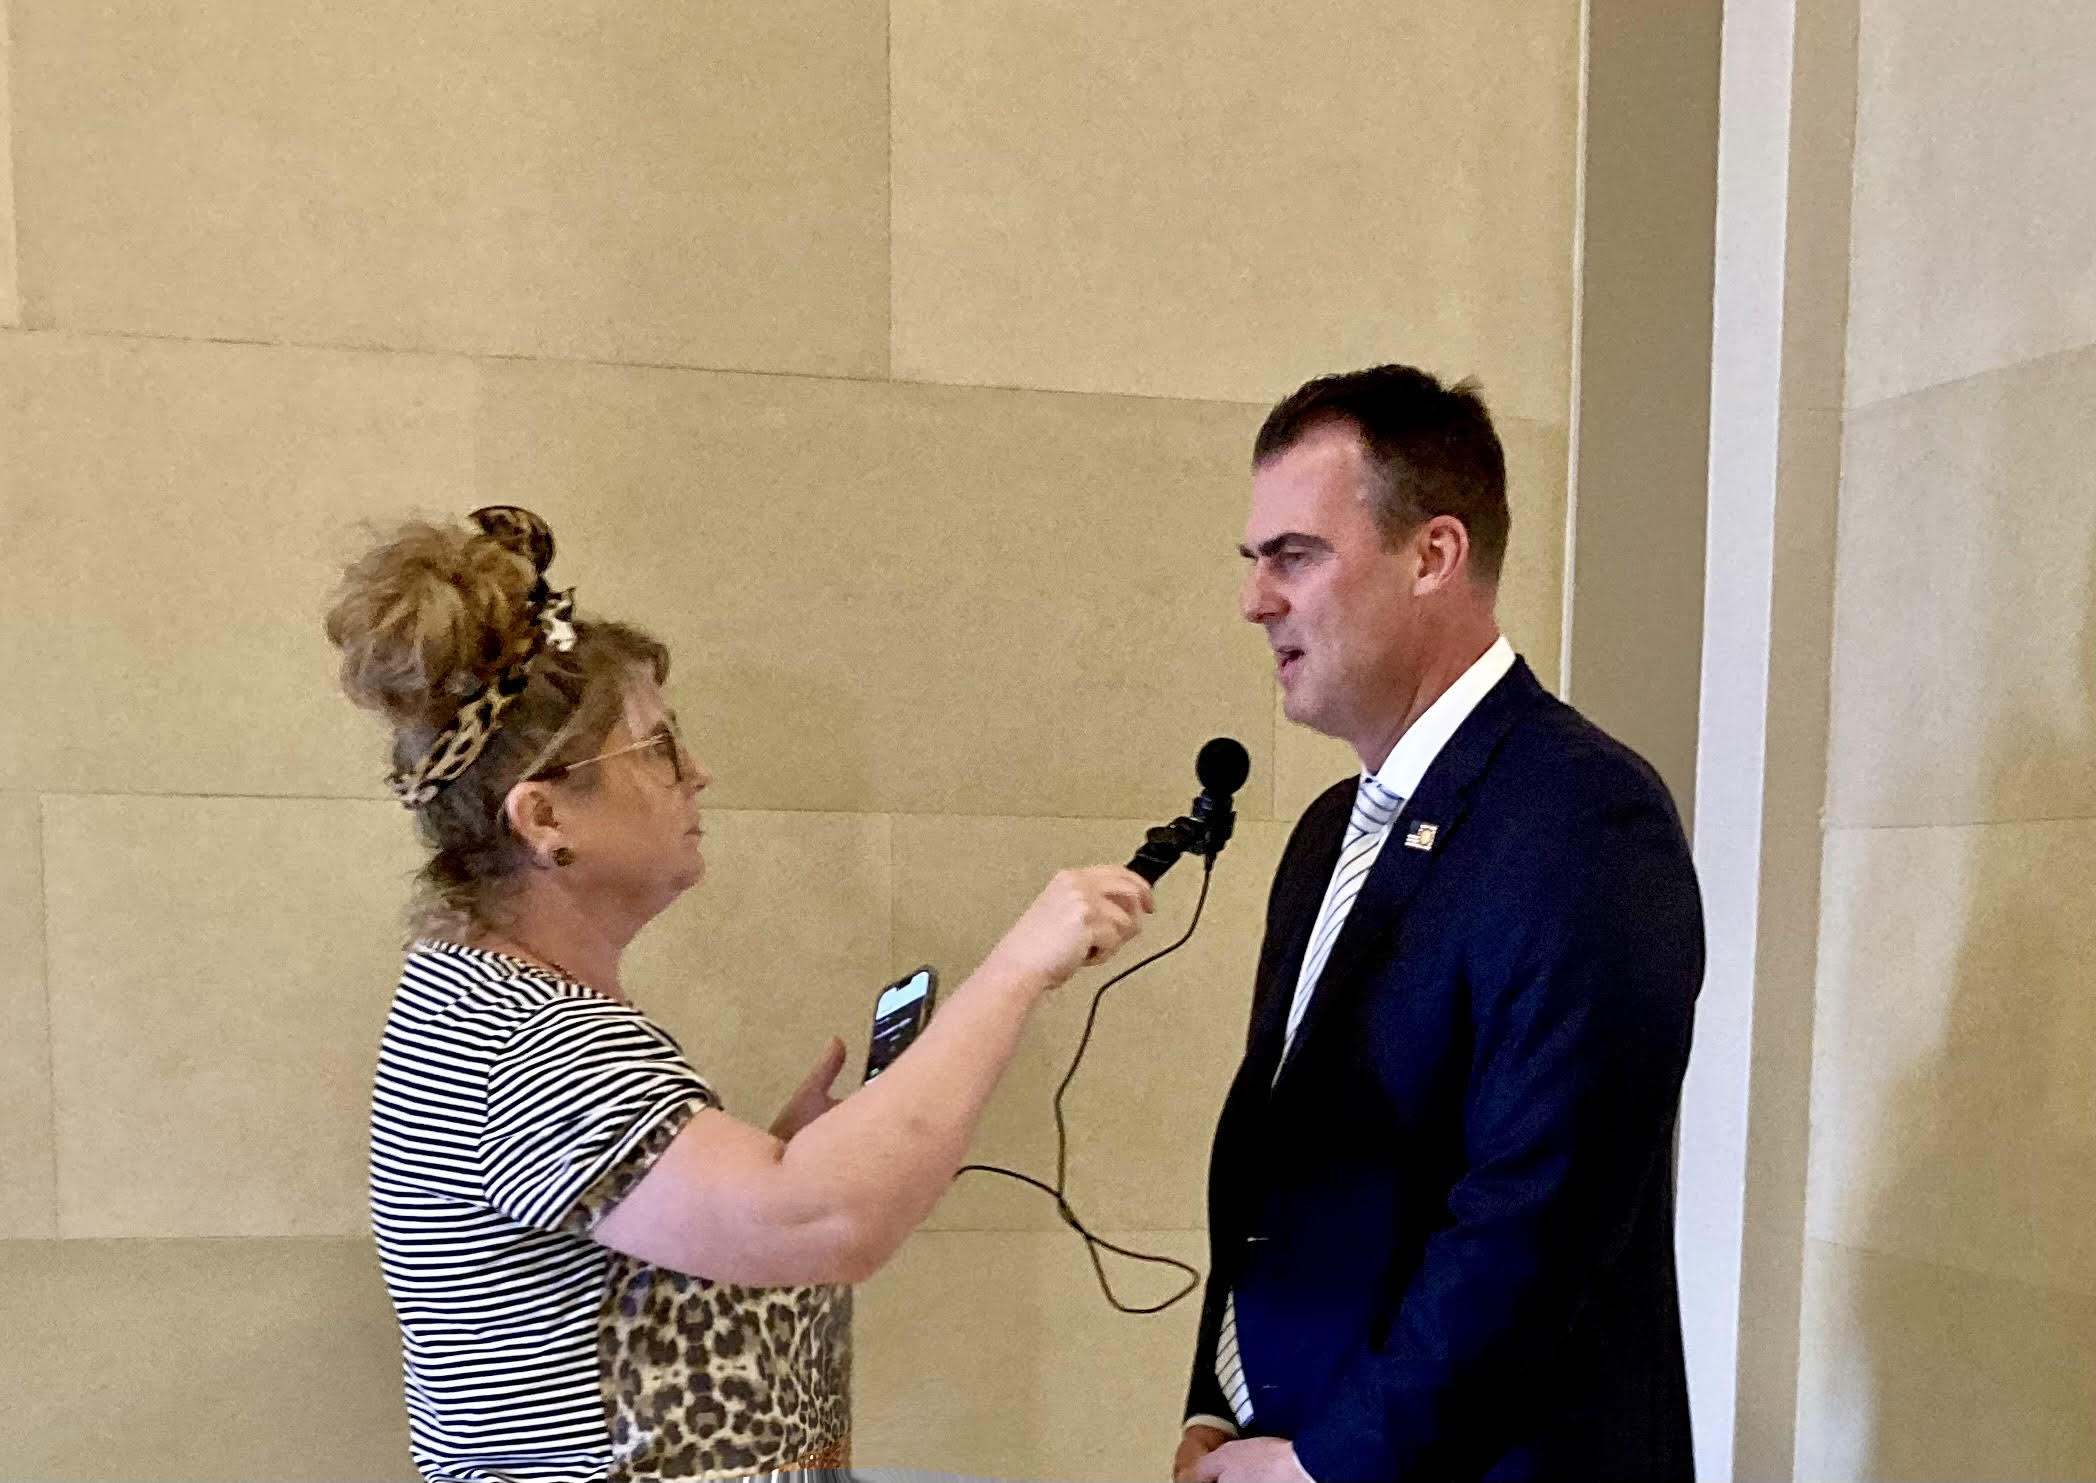 Governor Kevin Stitt Says Agriculture is the Fabric of Oklahoma